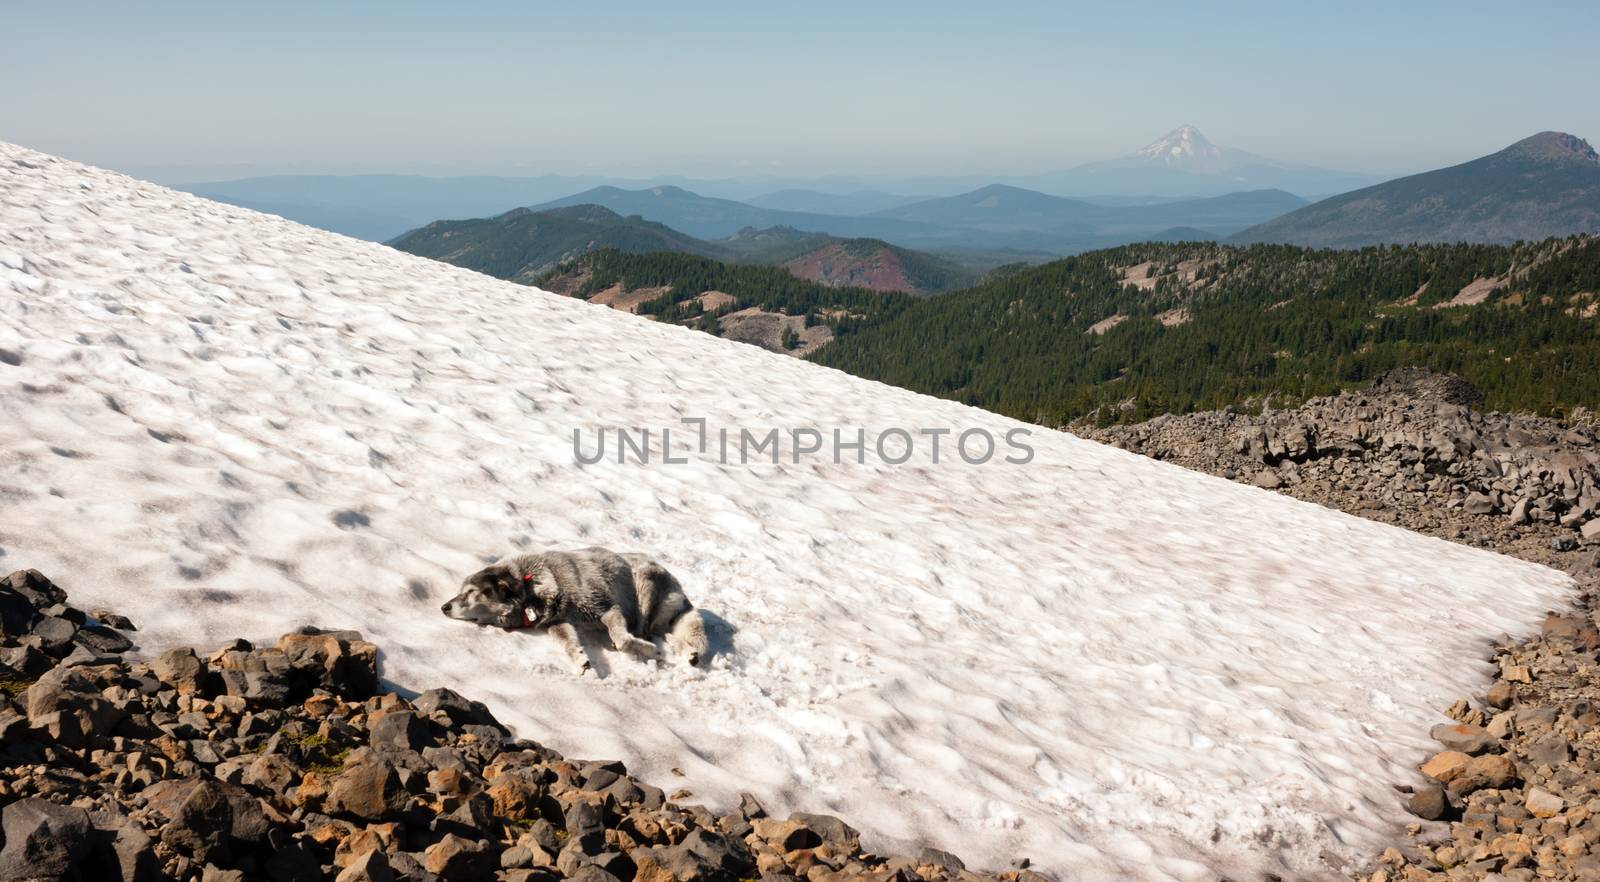 A large breed dog cooling off while resting in a snow field on the side of high mountain